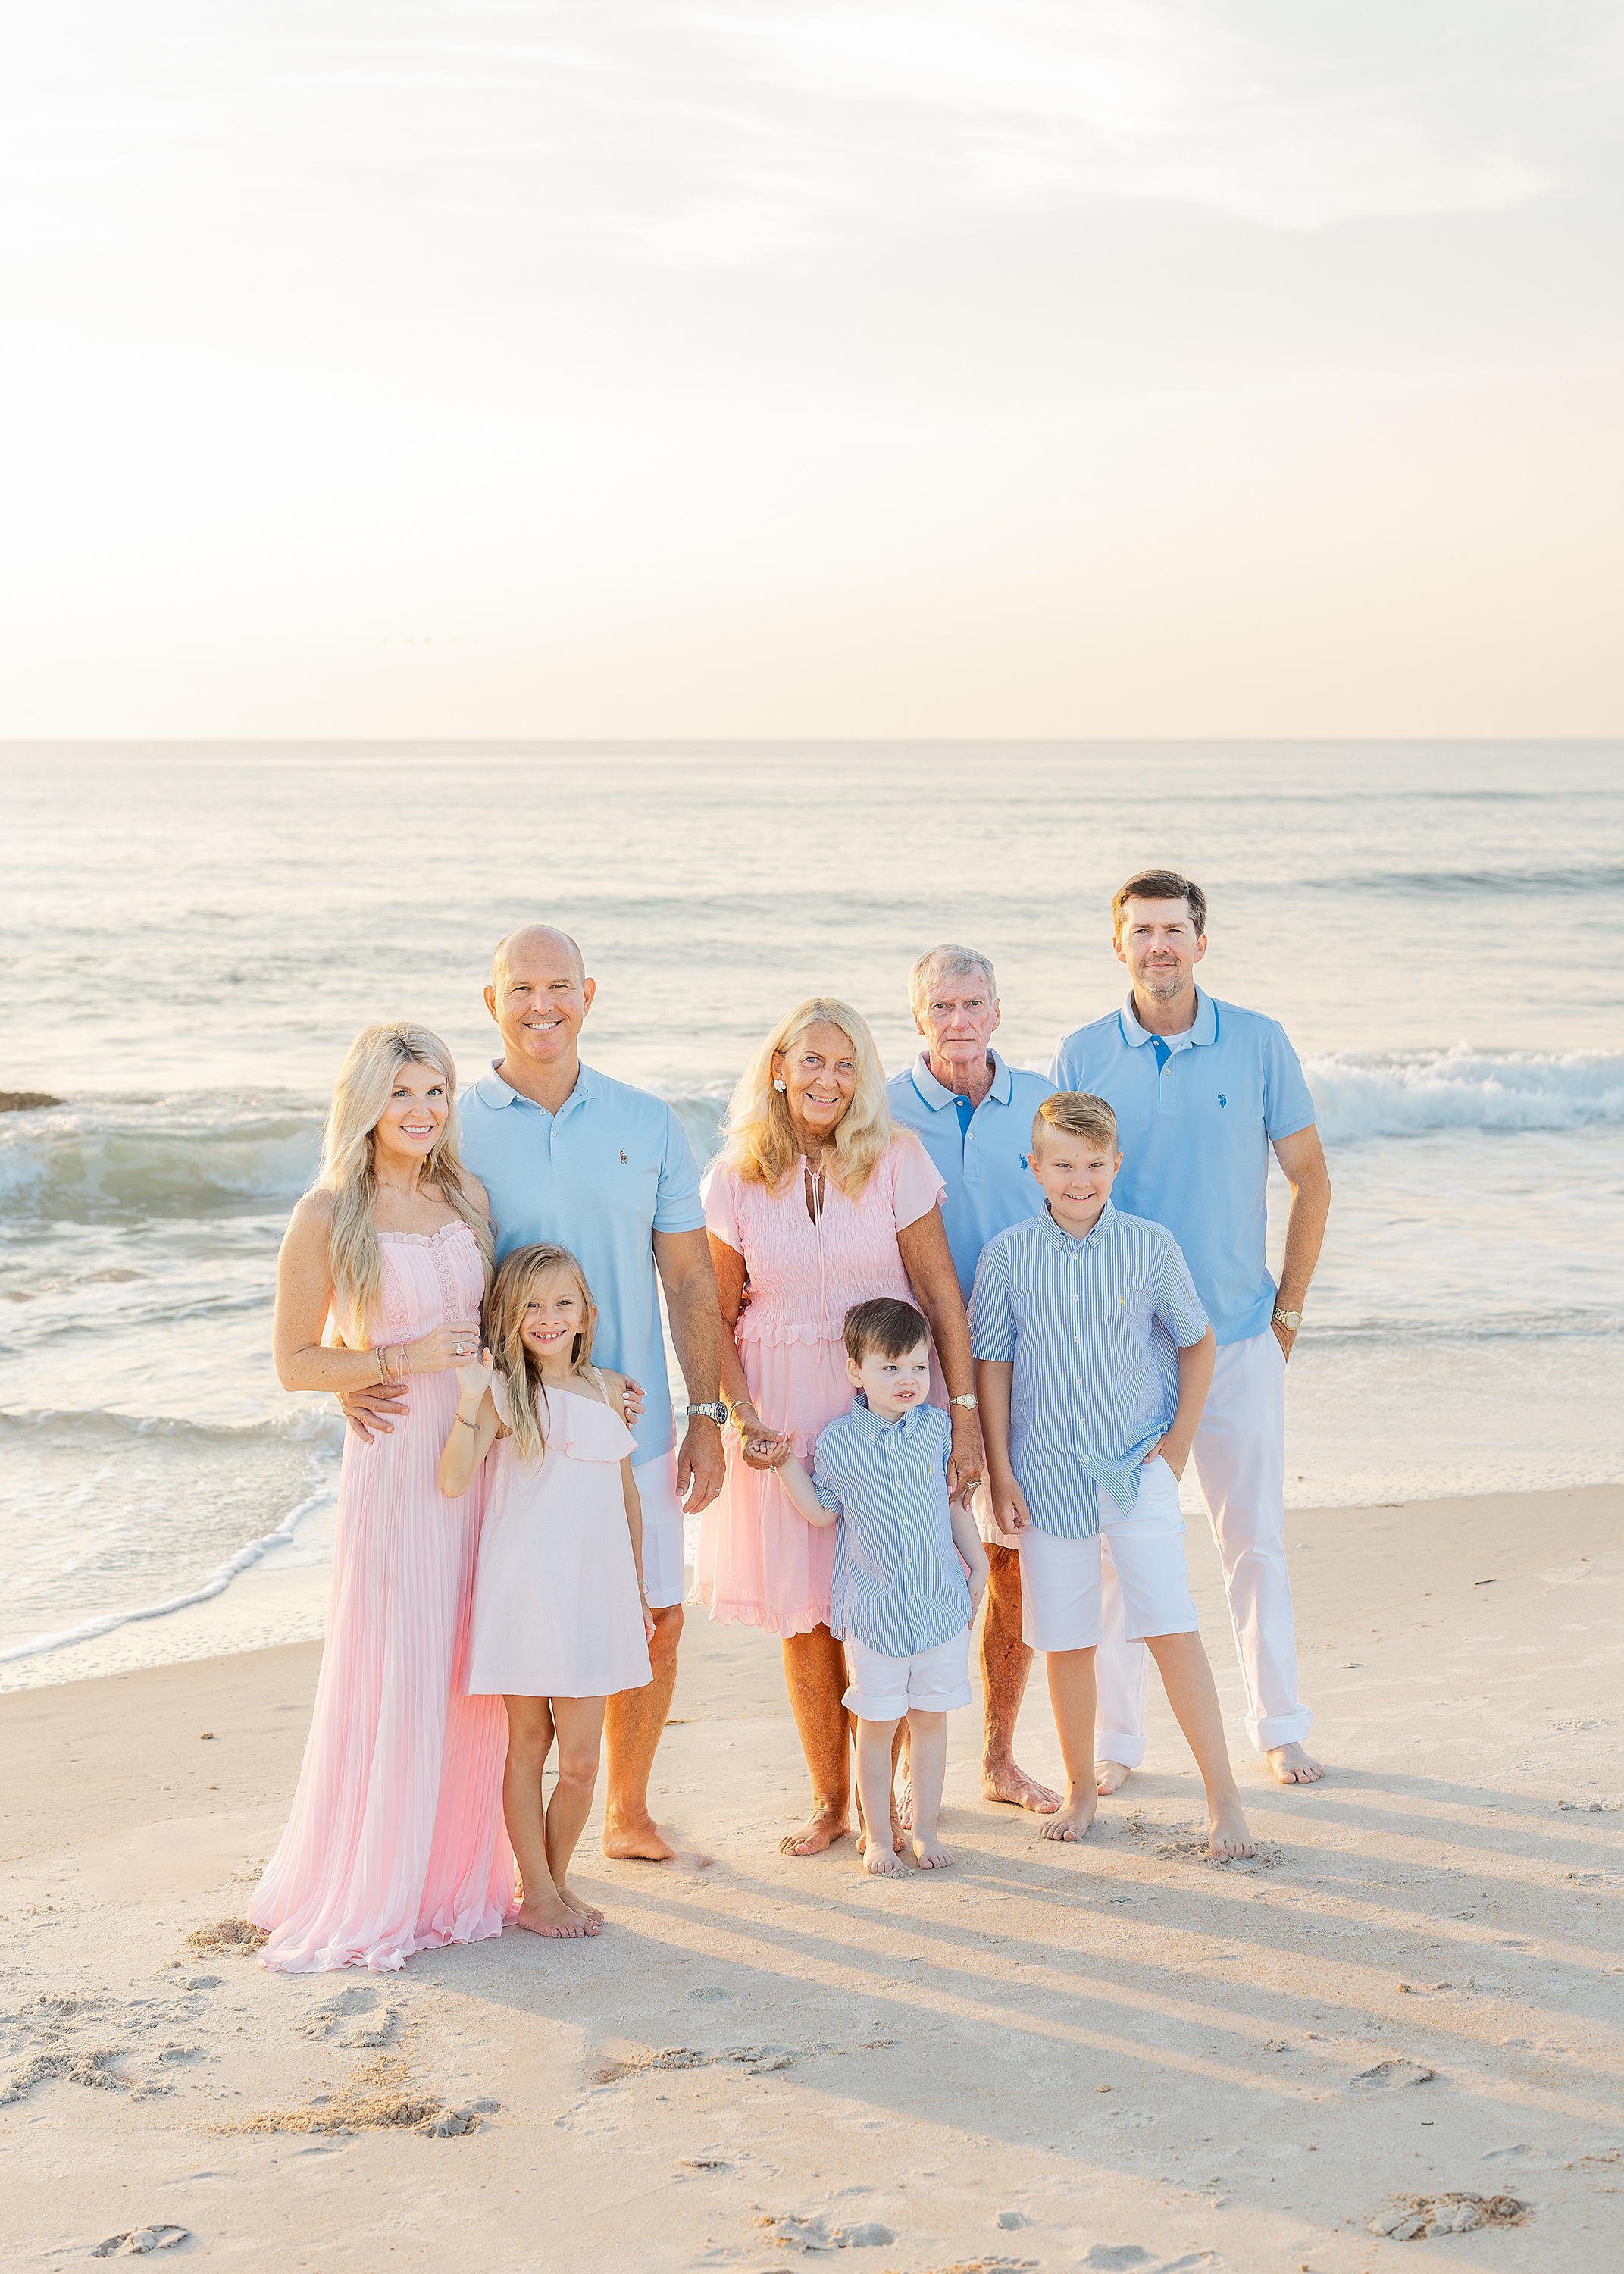 St. Augustine Florida extended family session on St. Augustine Beach at sunrise